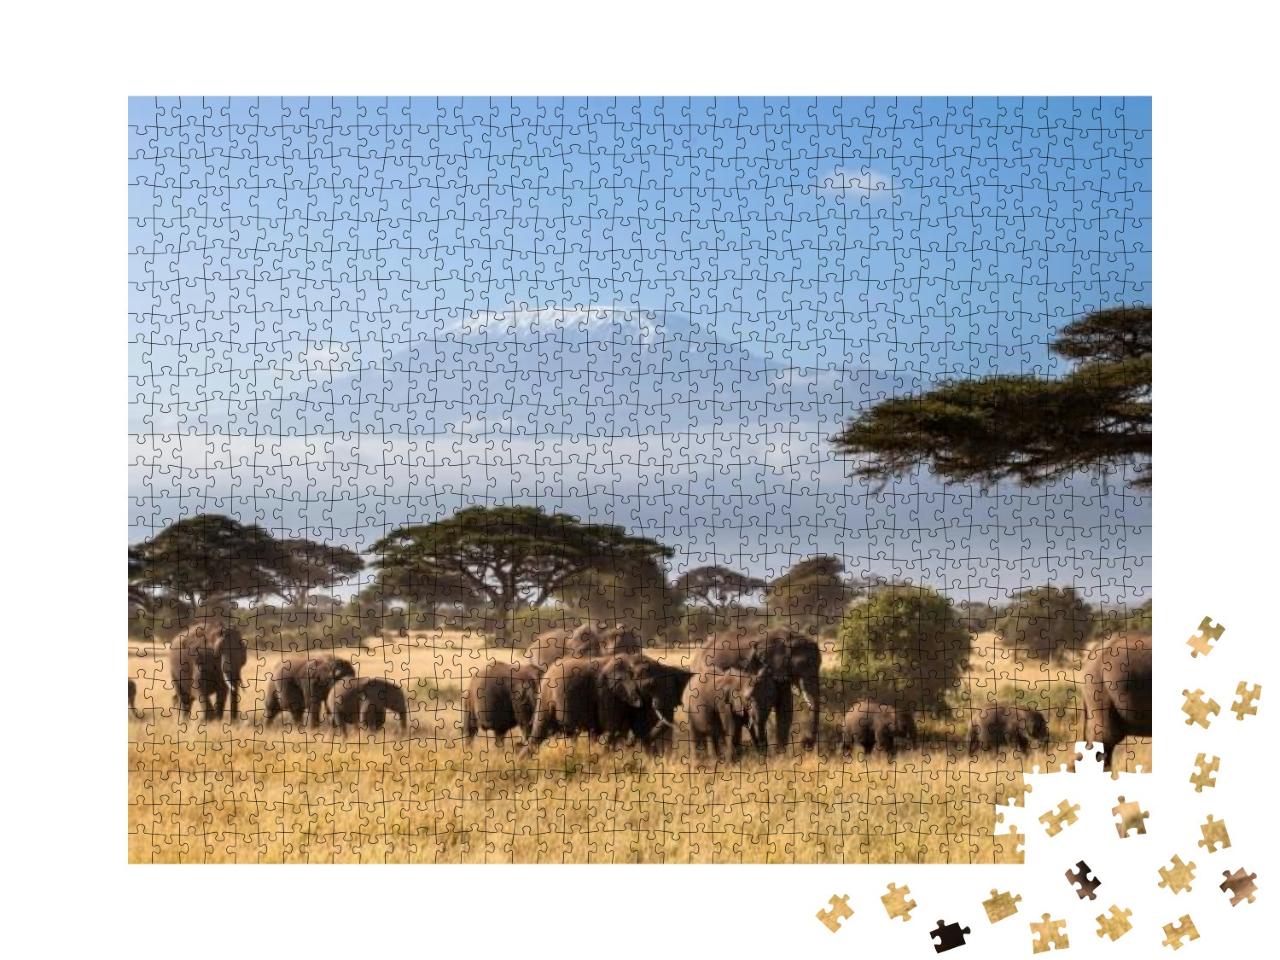 Herd of African Elephants Walking in the African Savannah... Jigsaw Puzzle with 1000 pieces